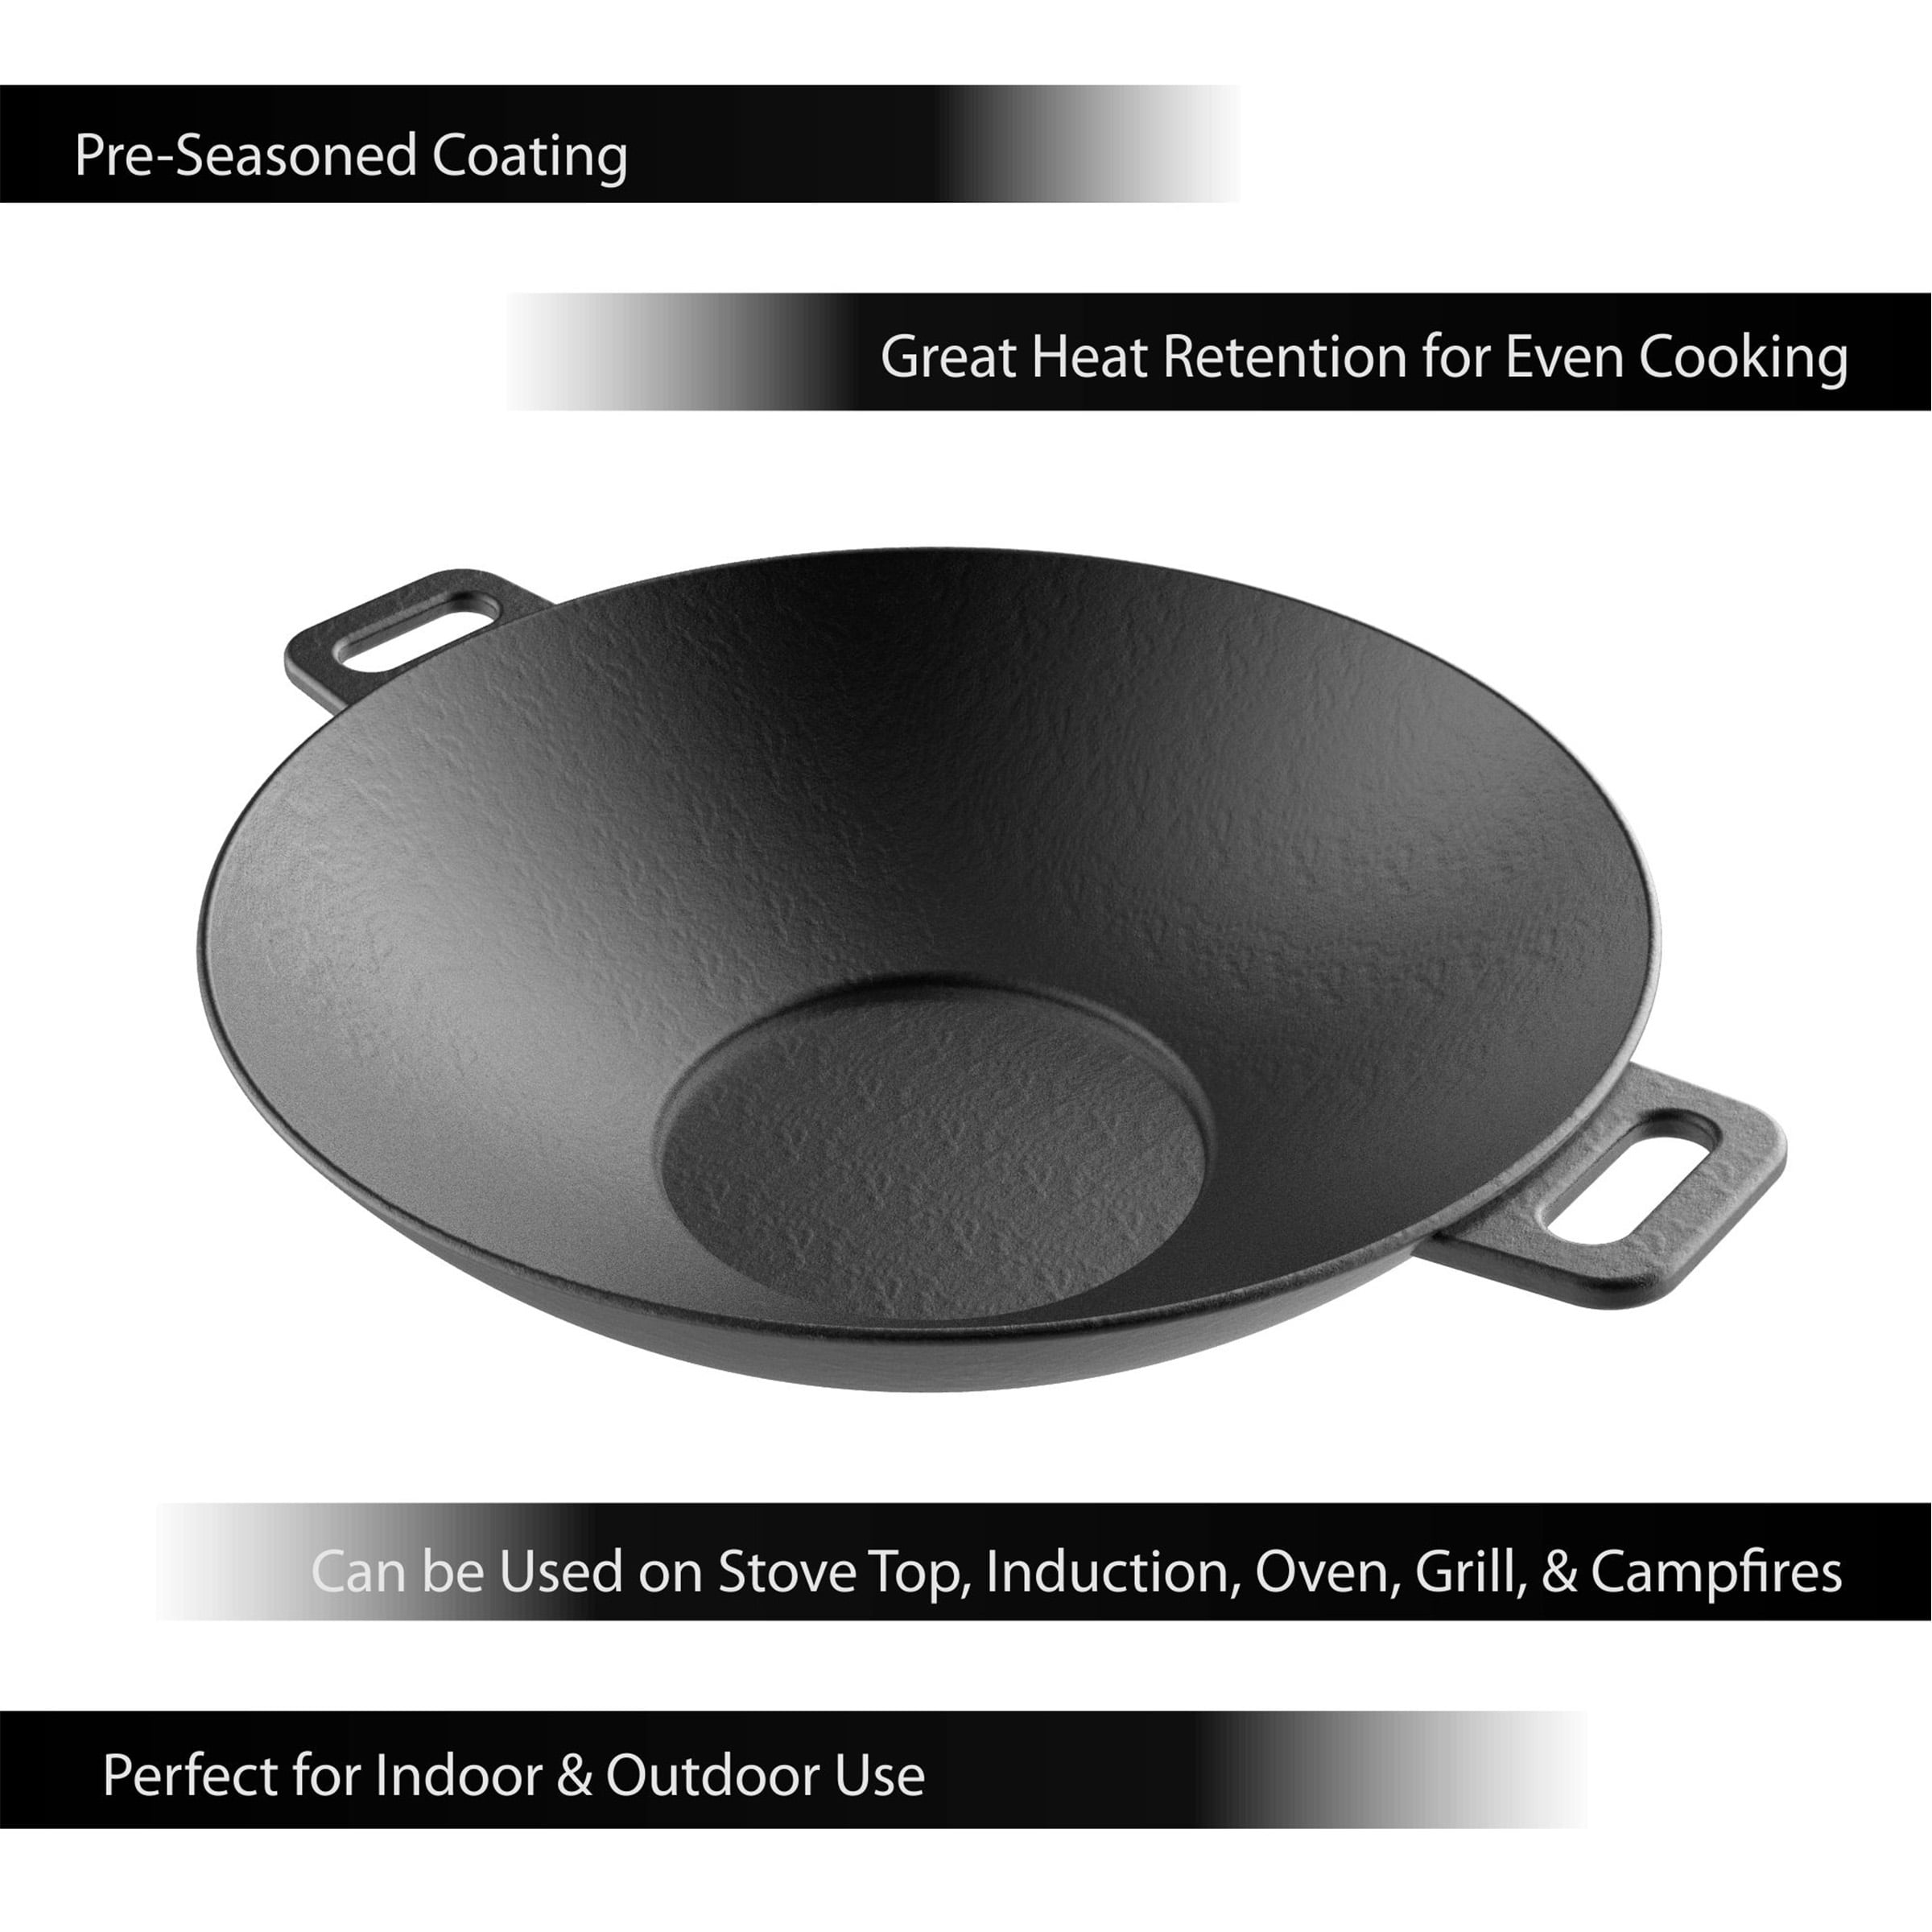 More Than 14K  Reviewers Swear by The Ringer for Cleaning Their Cast  Iron